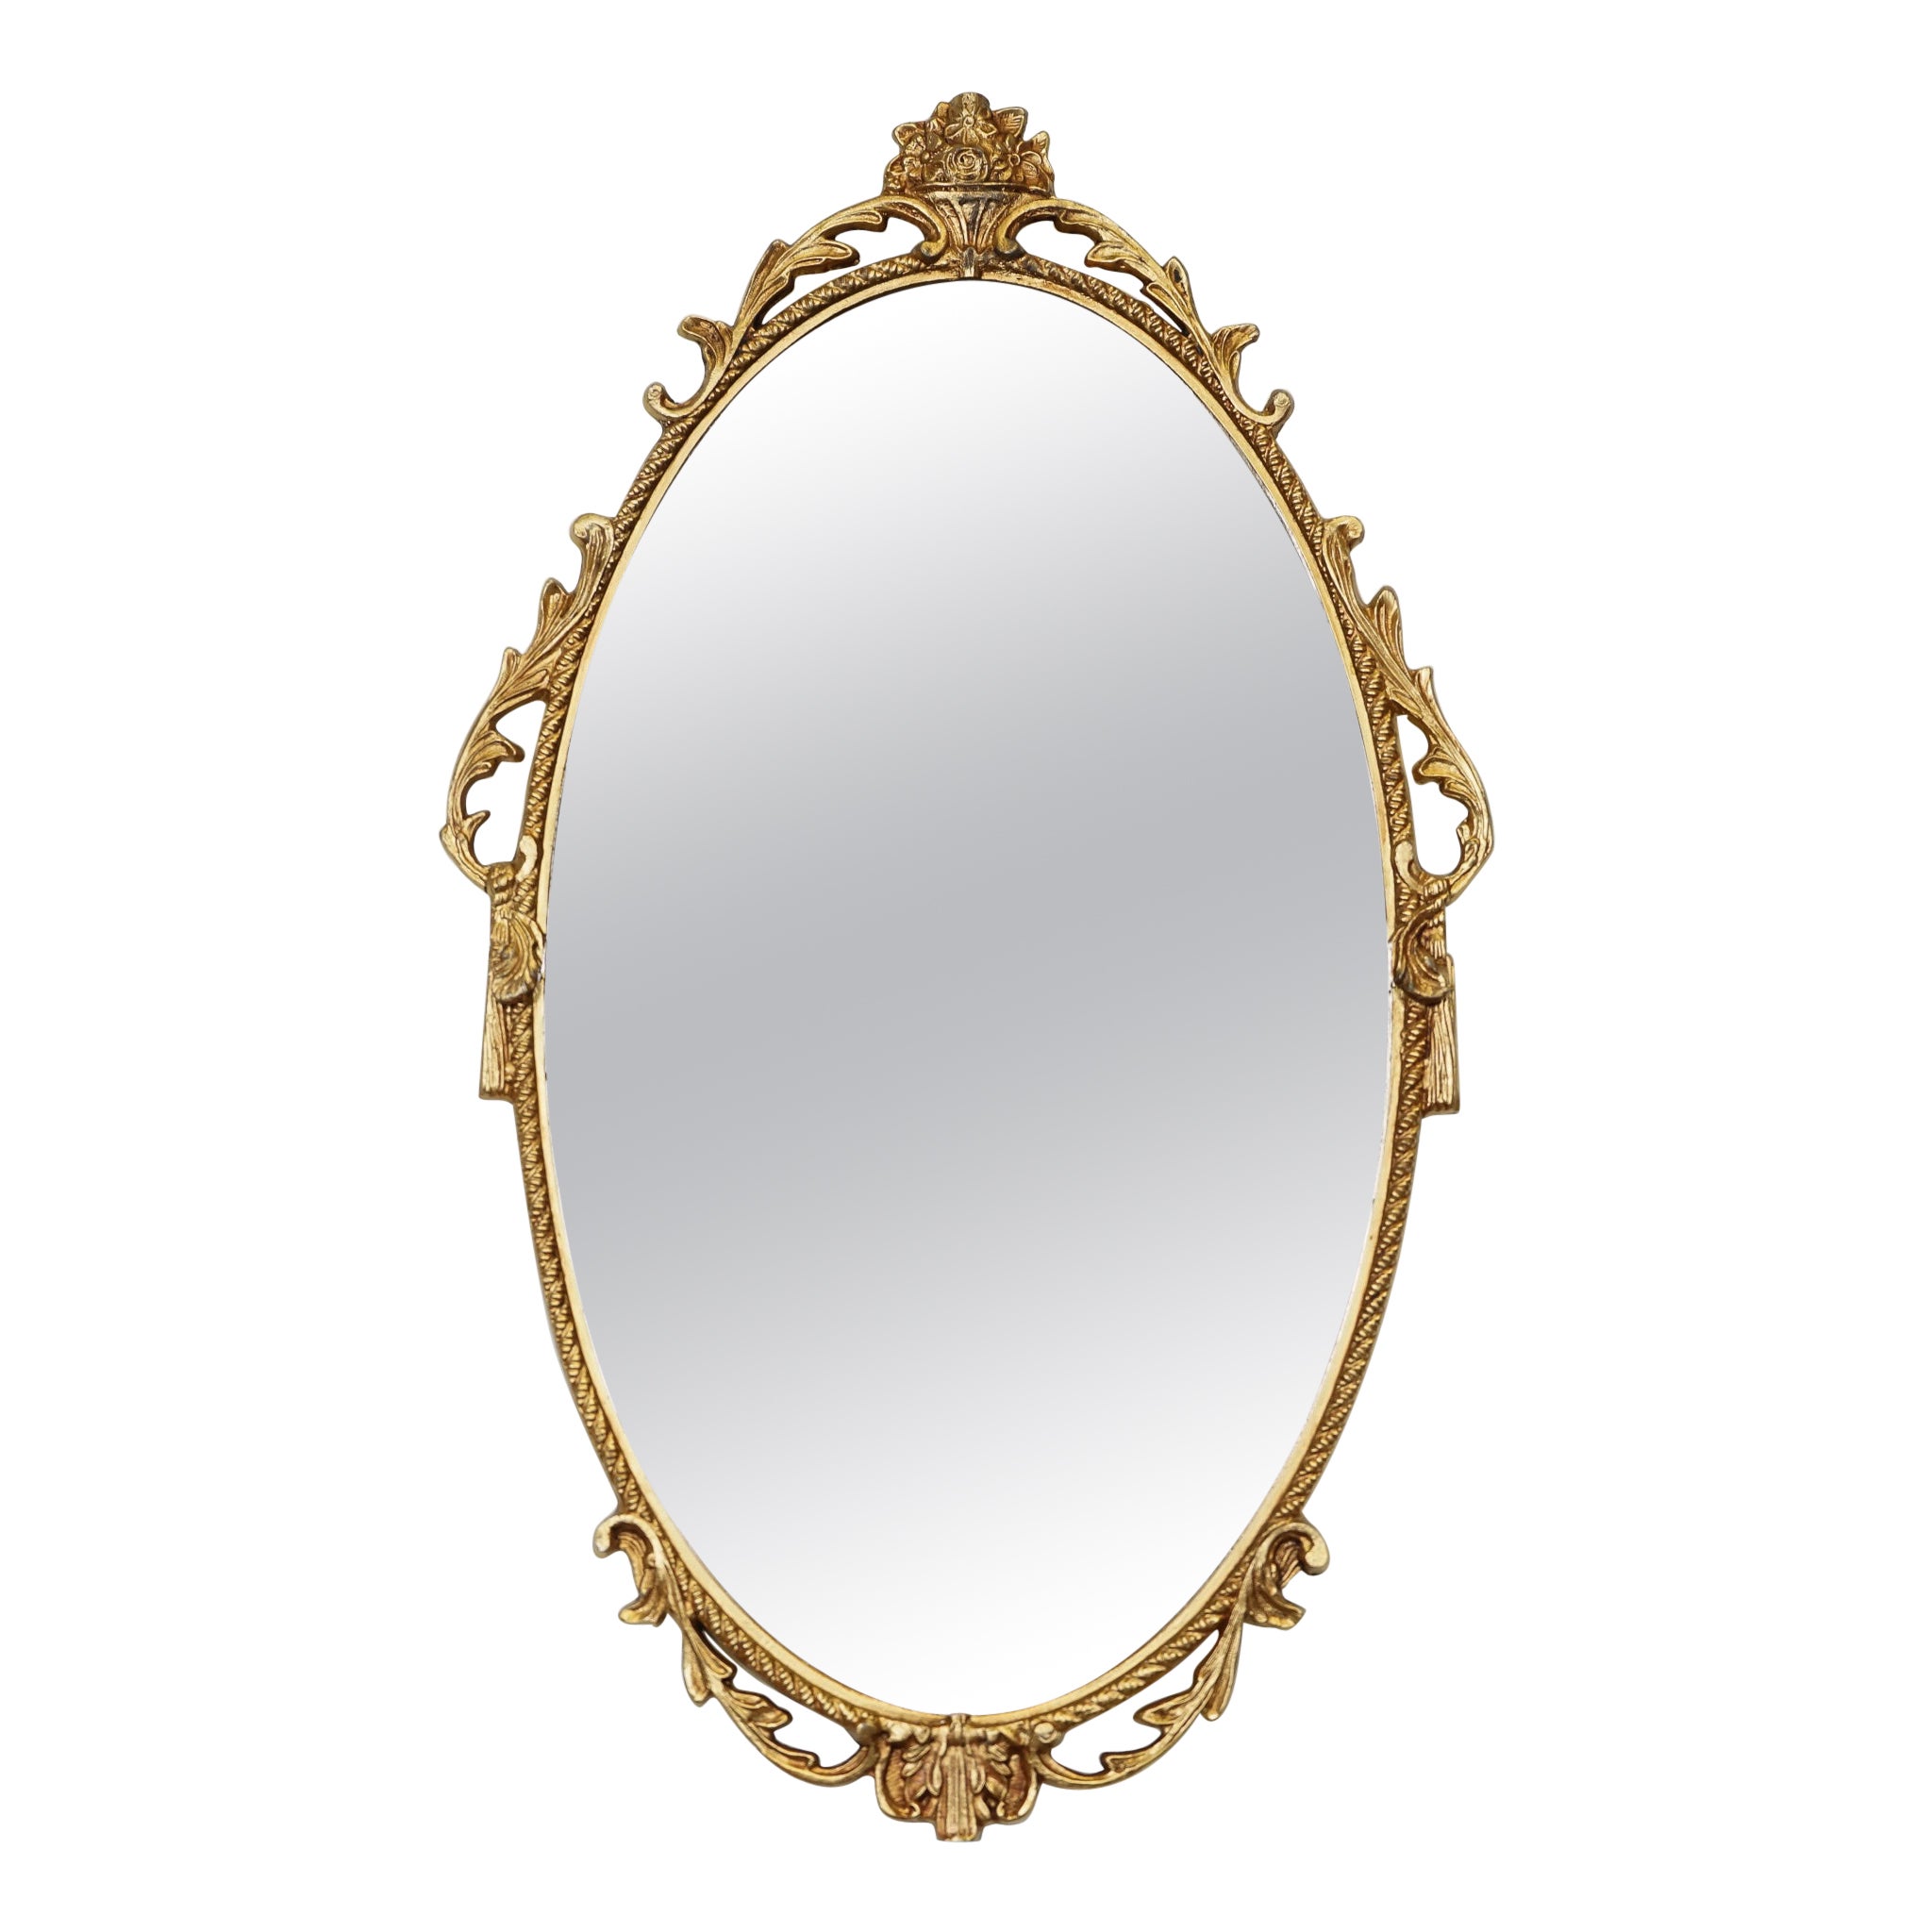 LOVELY OVAL GOLD ORNATE MiRROR J1 For Sale